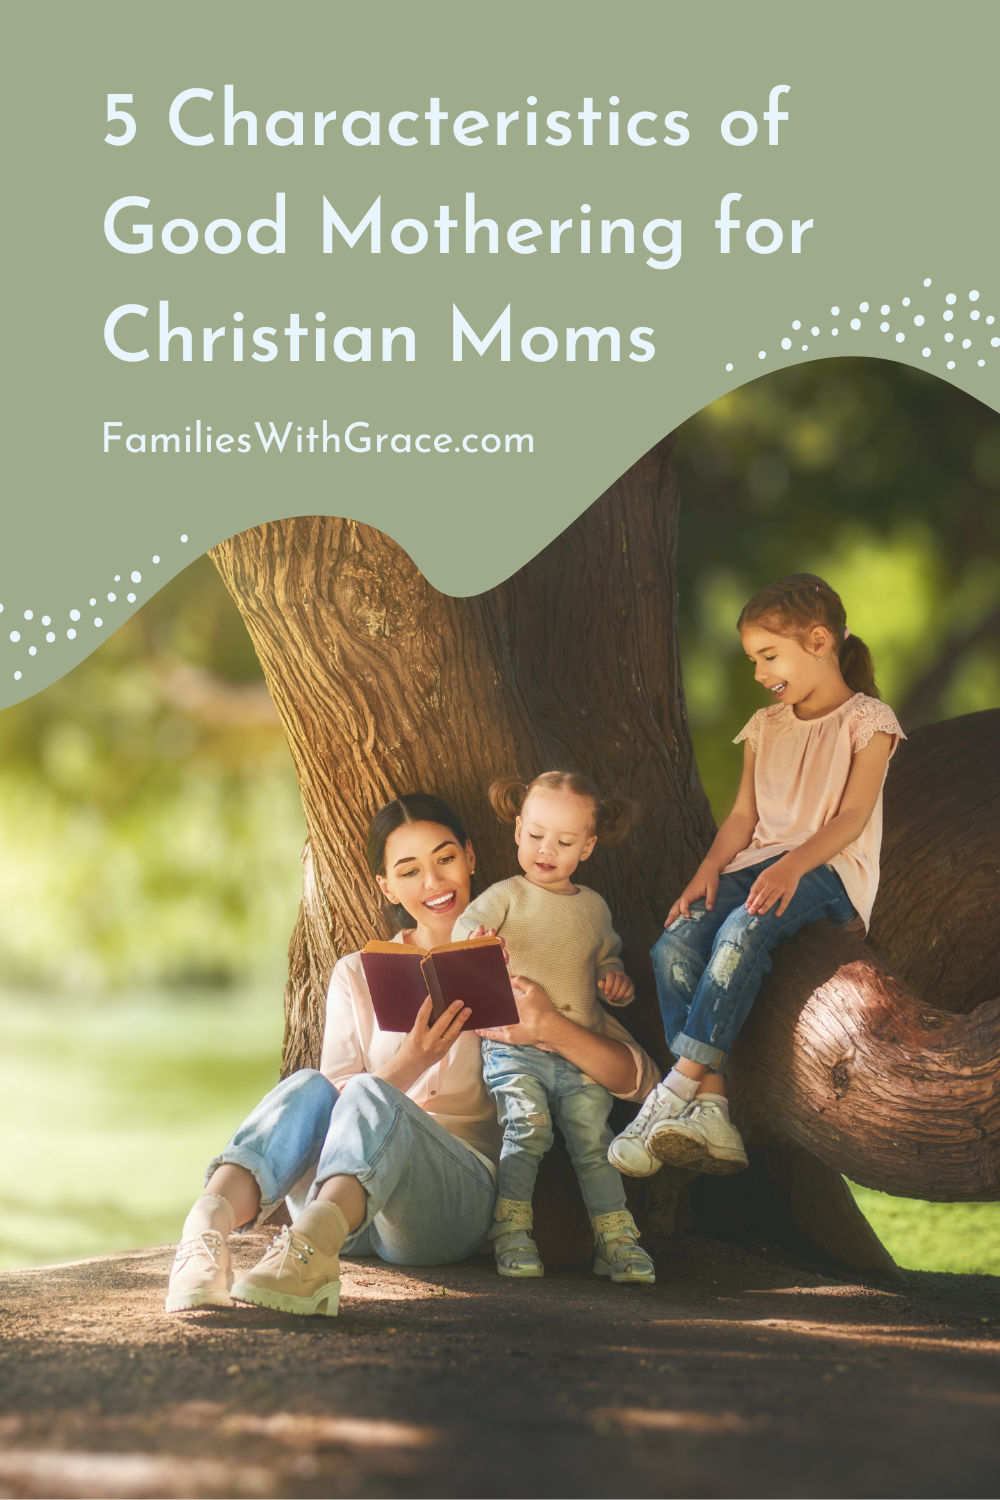 5 Characteristics of good mothering for Christian moms